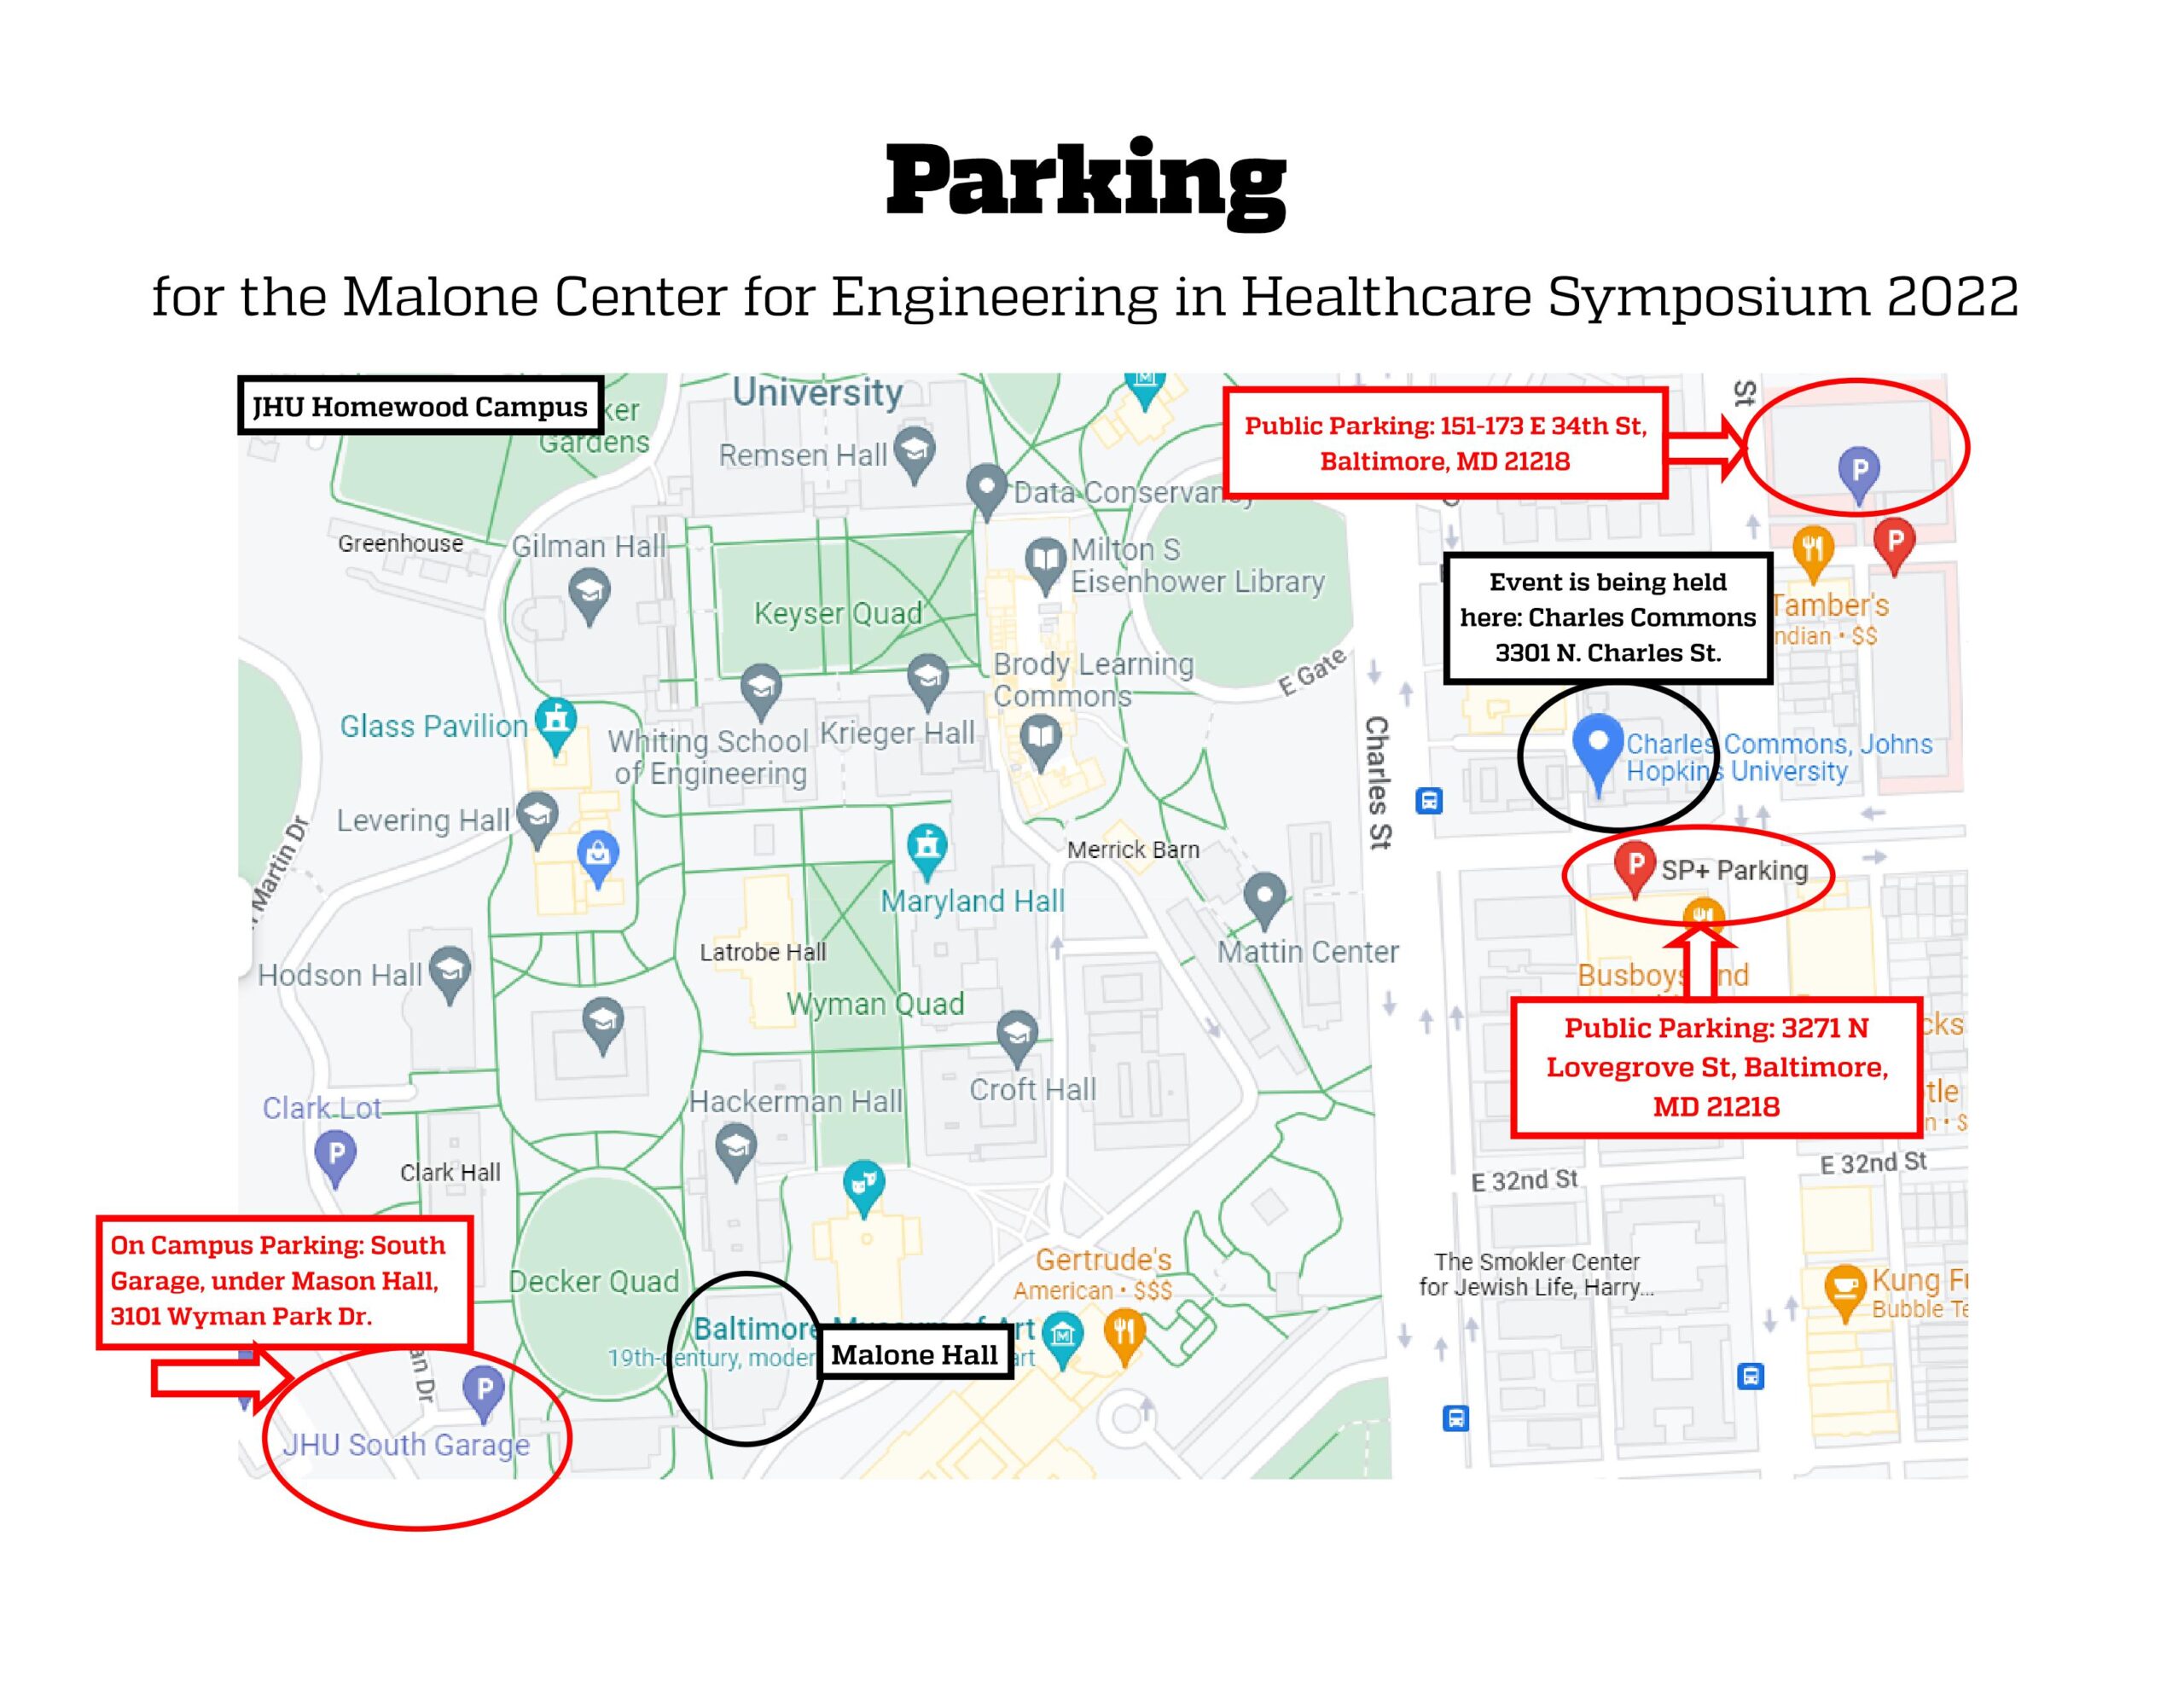 Parking for the Malone Center for Engineering in Healthcare Symposium 2022. Map of the Johns Hopkins Homewood campus and environs. JHU Homewood Campus. In a red circle: On Campus Parking: South Garage, Under Mason Hall, 3101 Wyman Park Dr. In a black circle: Malone Hall. In a red circle: Public Parking: 151-173 E 34th St. Baltimore, MD 21218. In a black circle: Event is being held here: Charles Commons 3301 N. Charles St. In a red circle: Public Parking: 3271 N Lovegrove St, Baltimore, MD 21218.